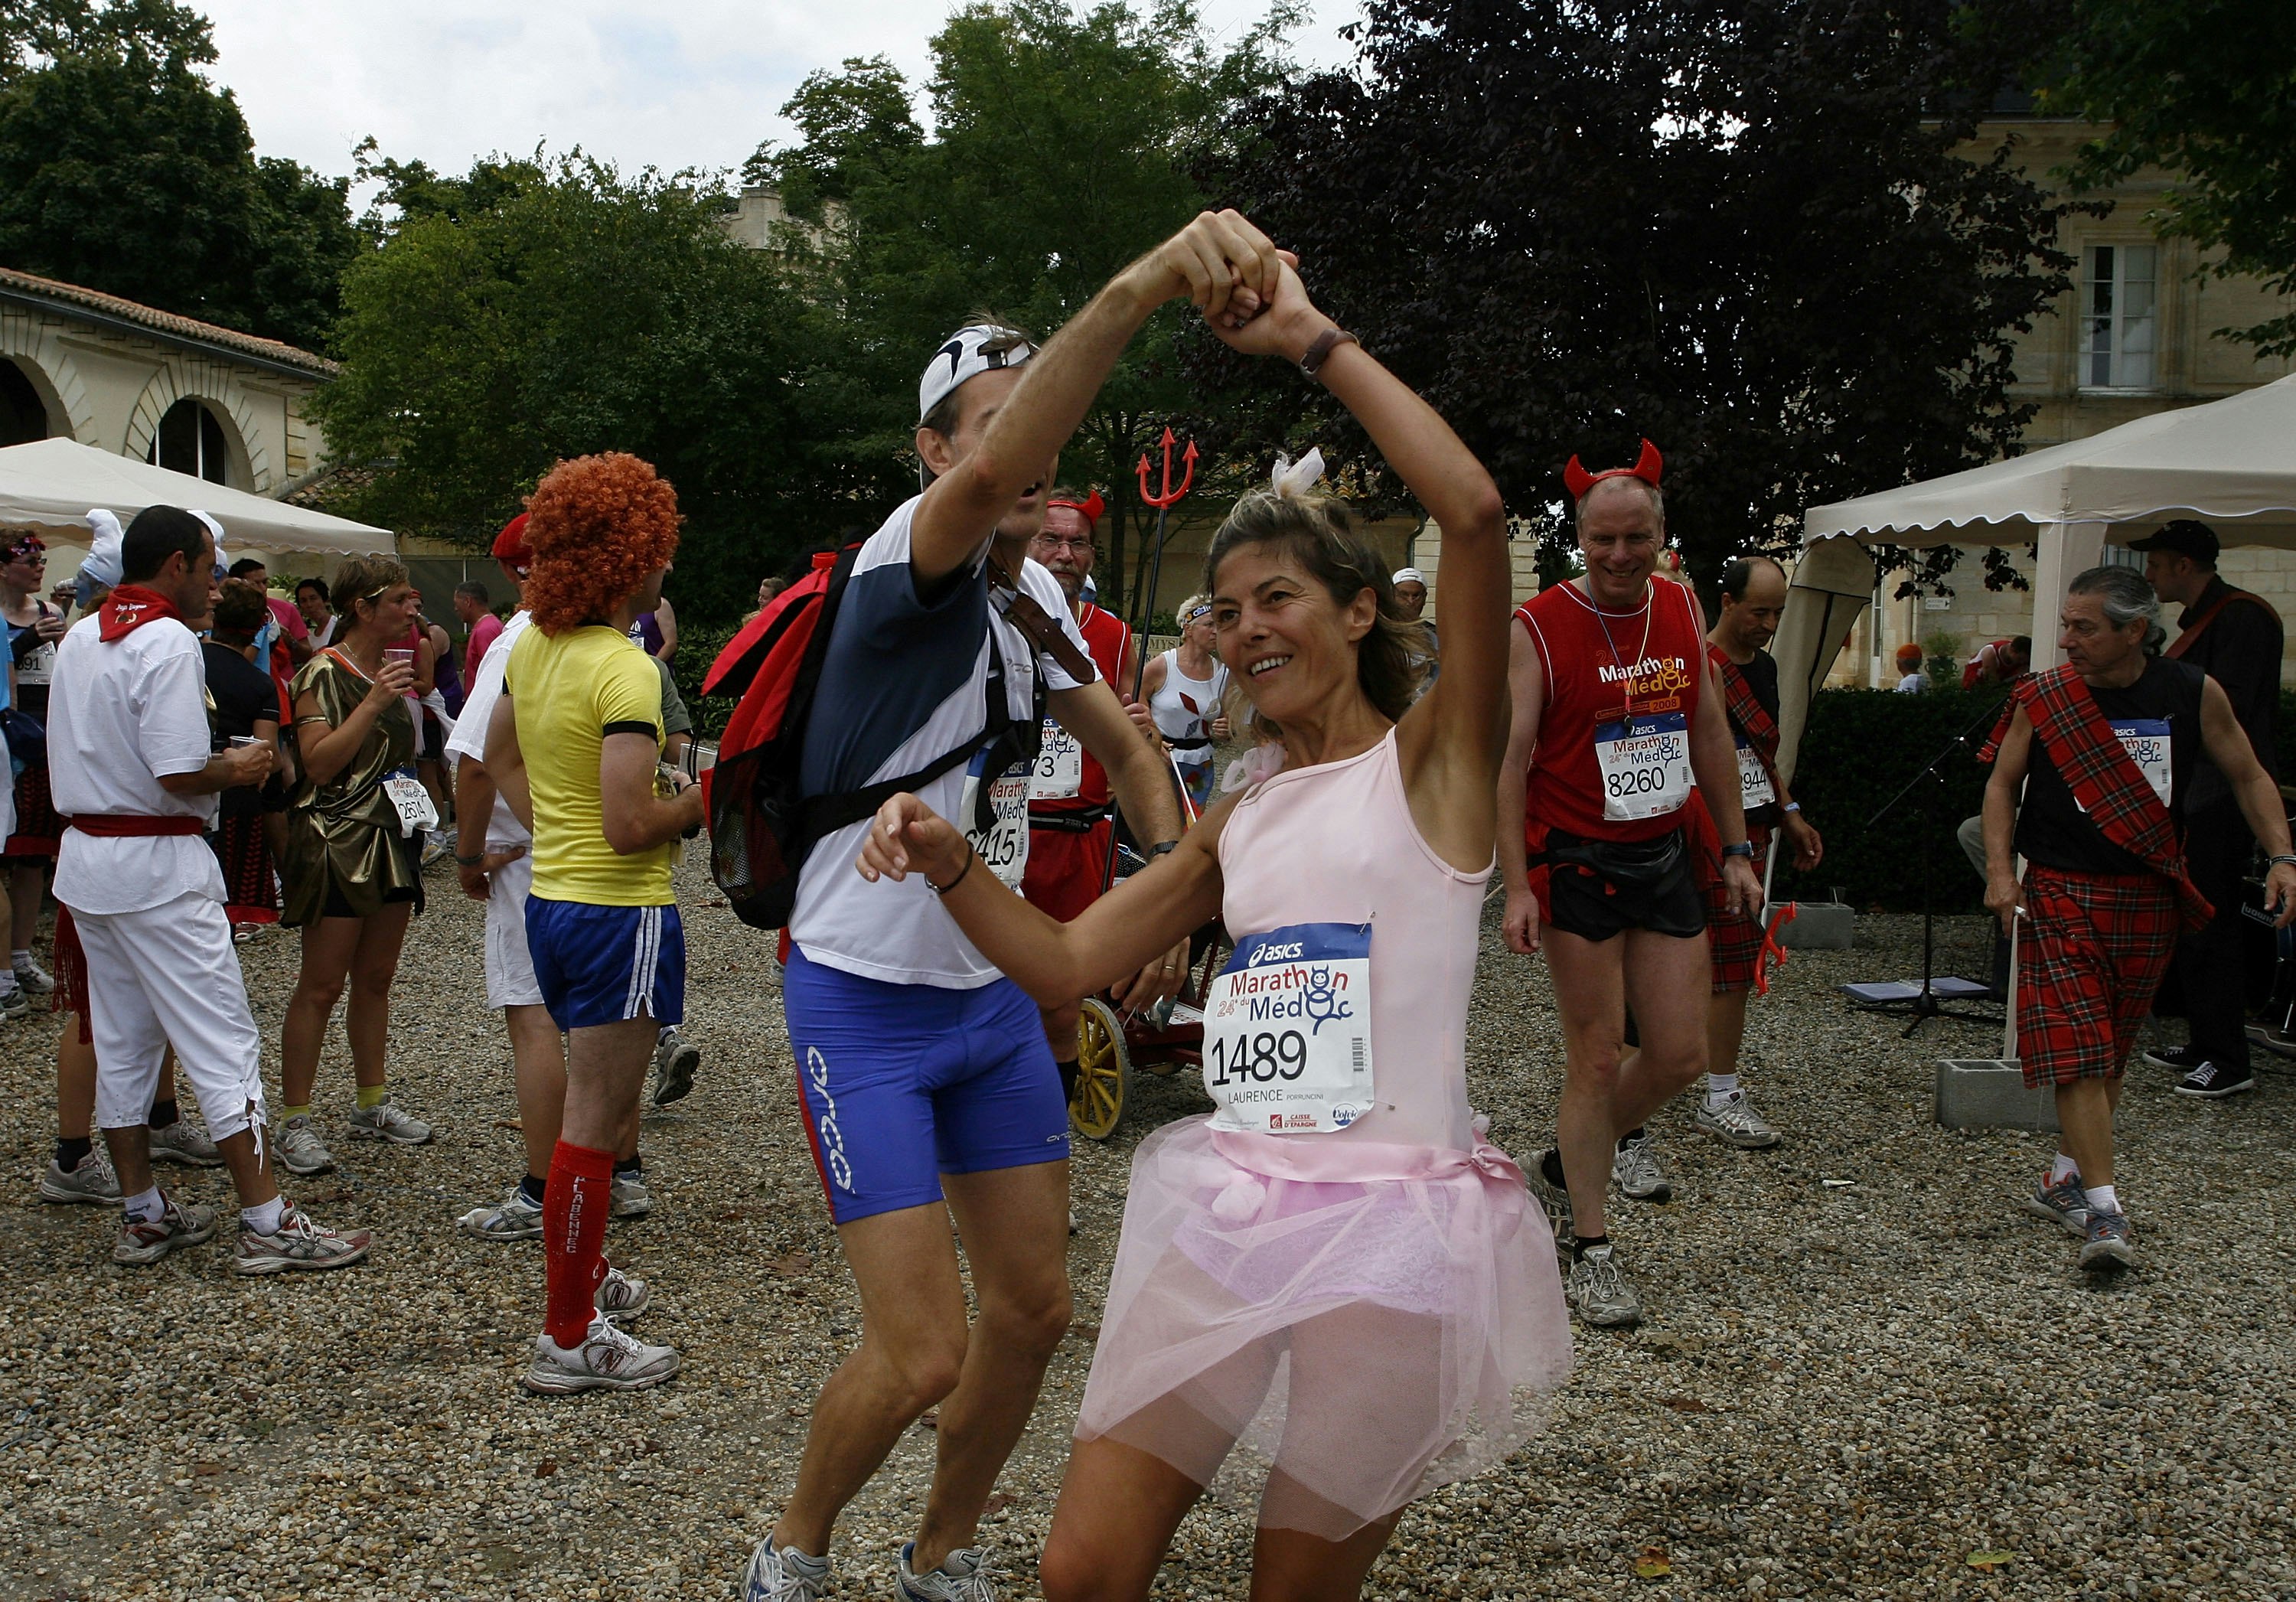 Several marathon participants are milling around at a vineyard wine-tasting station. In the foreground, a man and a woman (who is dressed as a ballerina) are dancing.